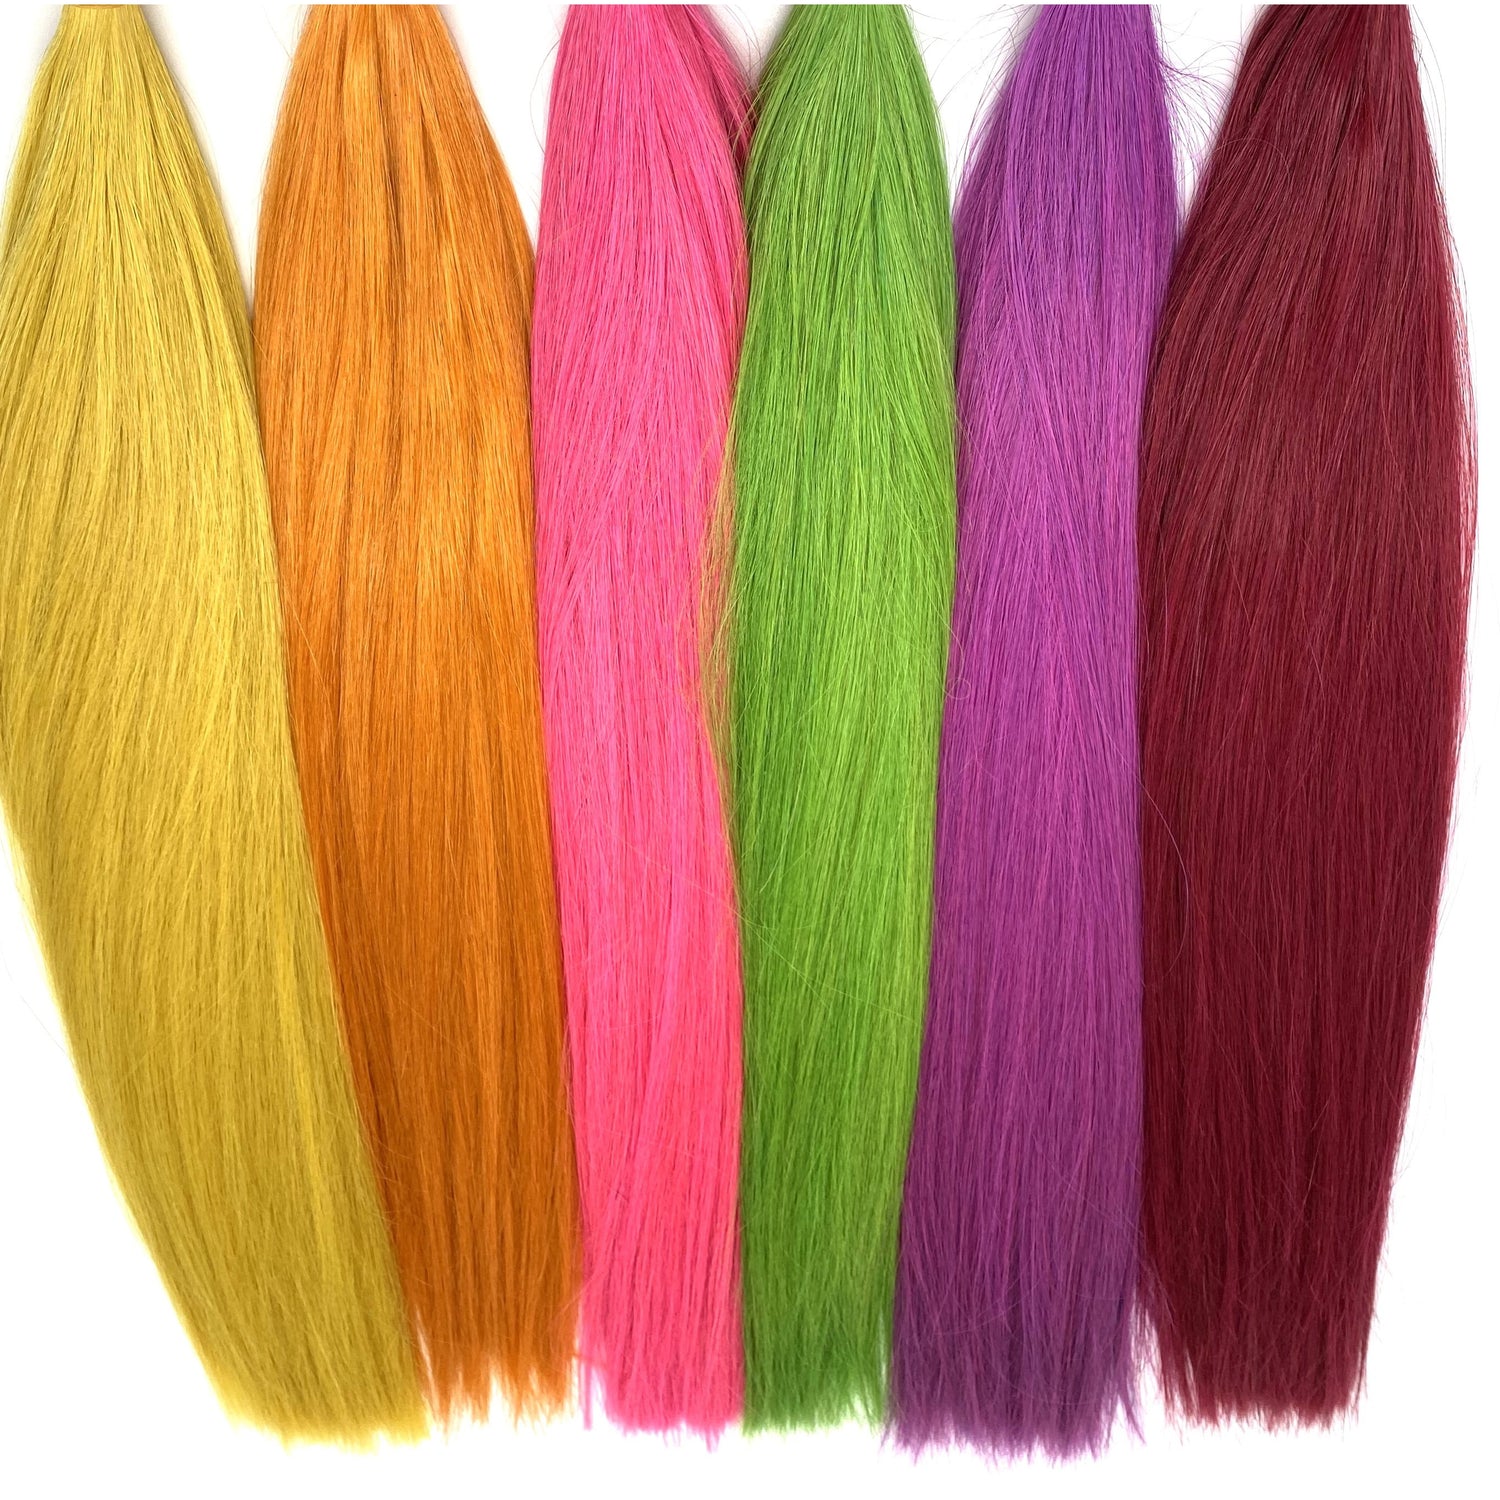 REMY Human Hair Fantasy colors - VIP Extensions